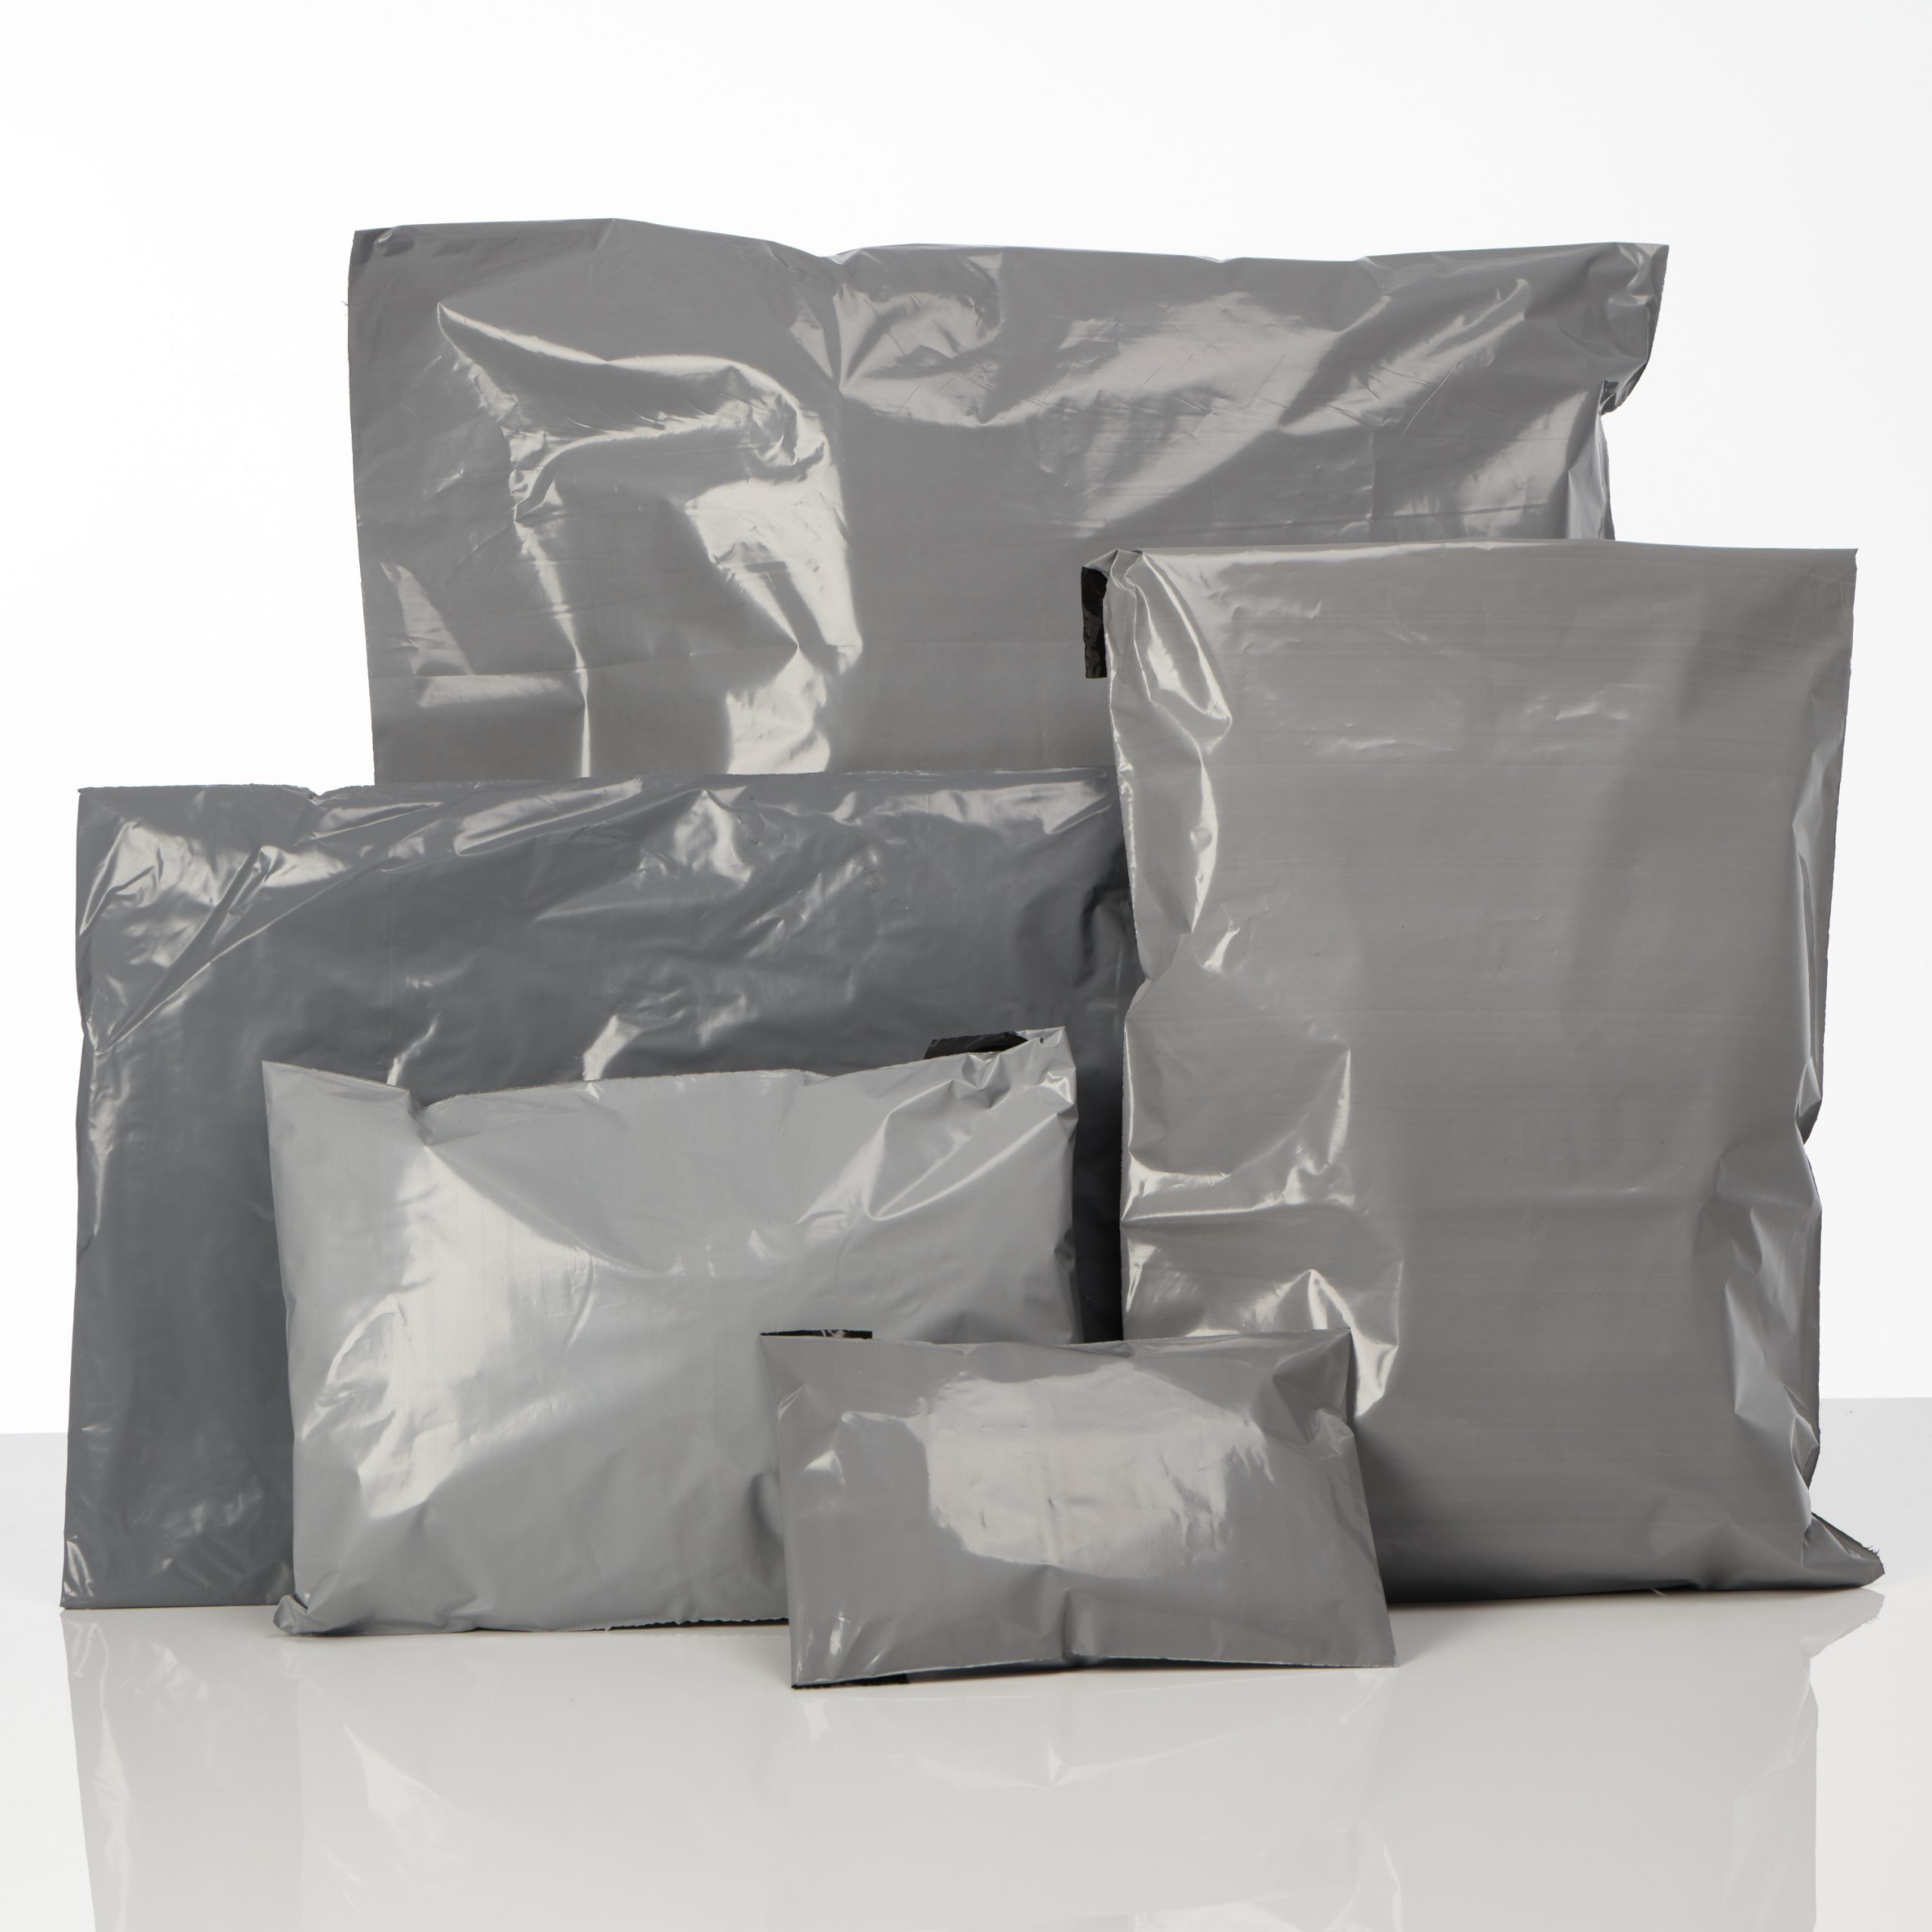 15 x 18 Grey mailing bags Strong,Self-Seal Tape,Graded-Material Same-Day P&P UK 